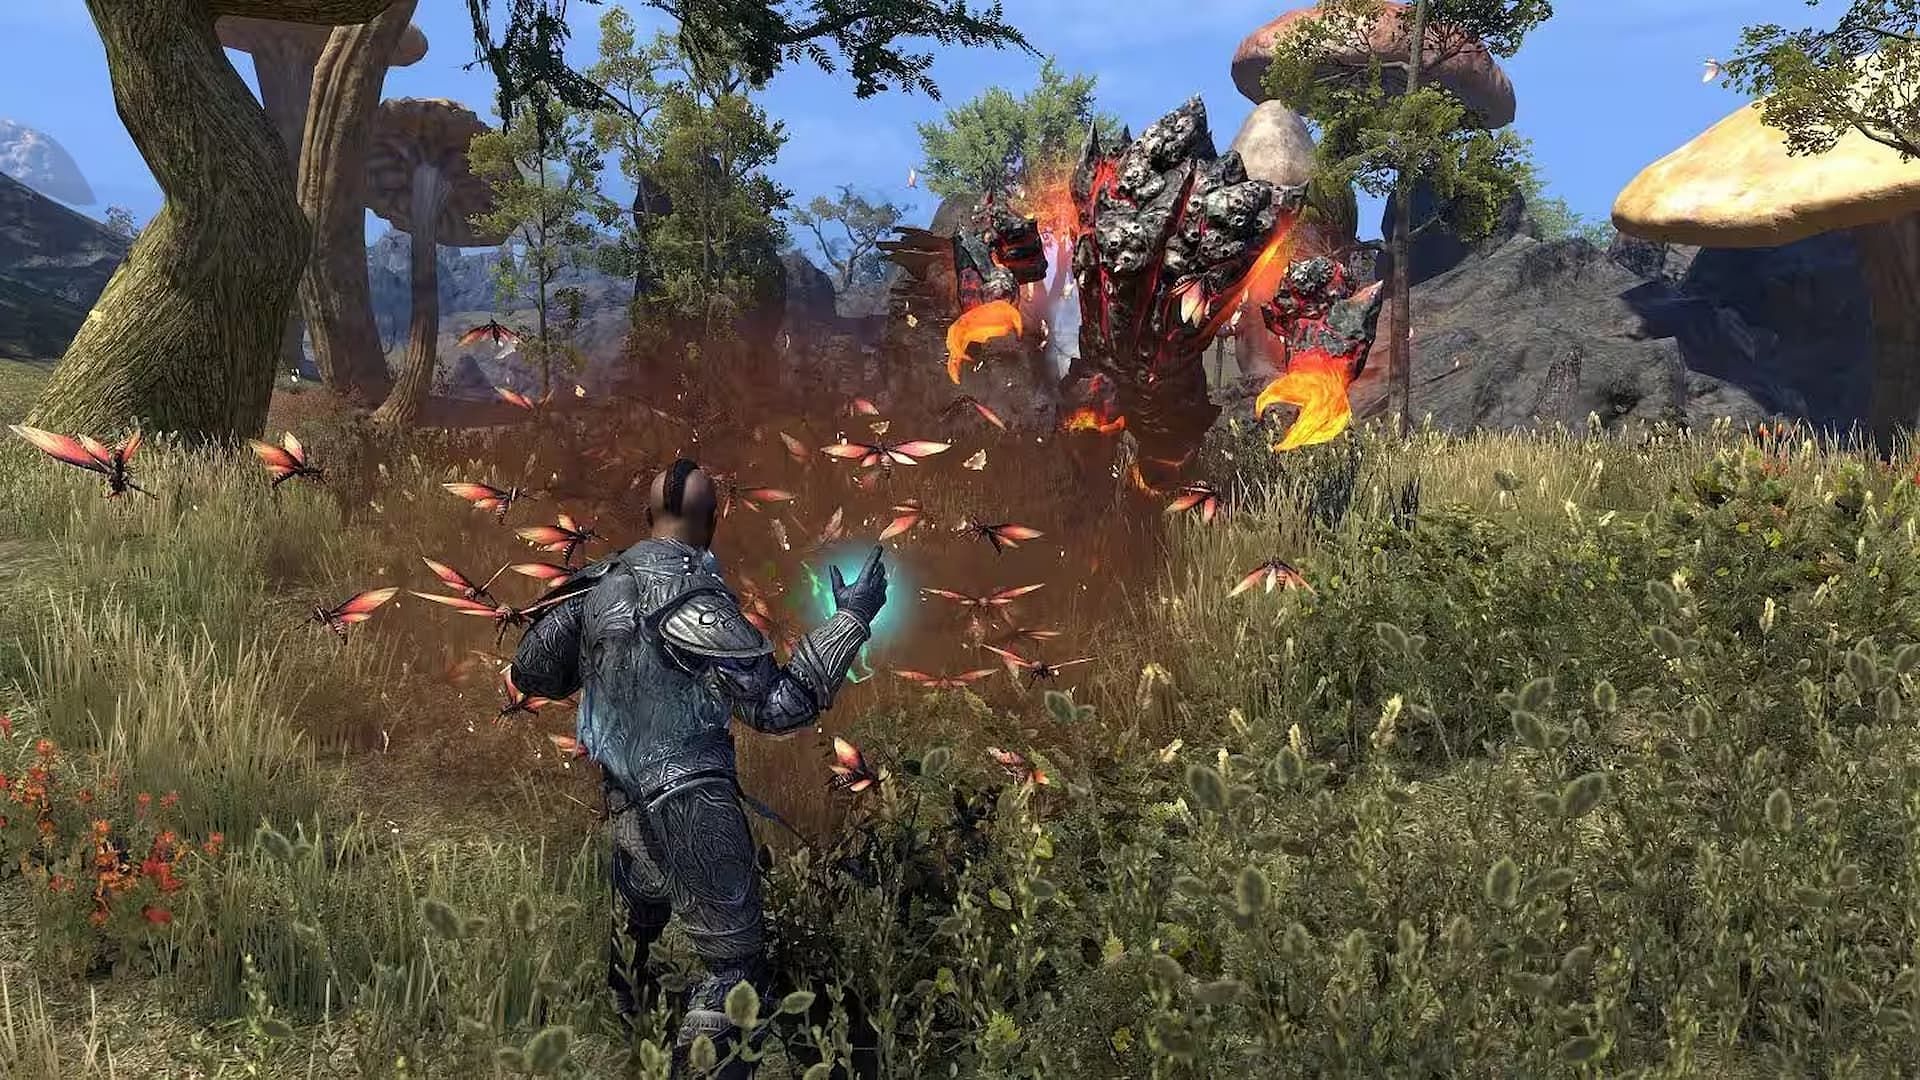 Wardens can call forth swarms of flies to attack their enemies in battle. (Image via ZeniMax Online Studios)